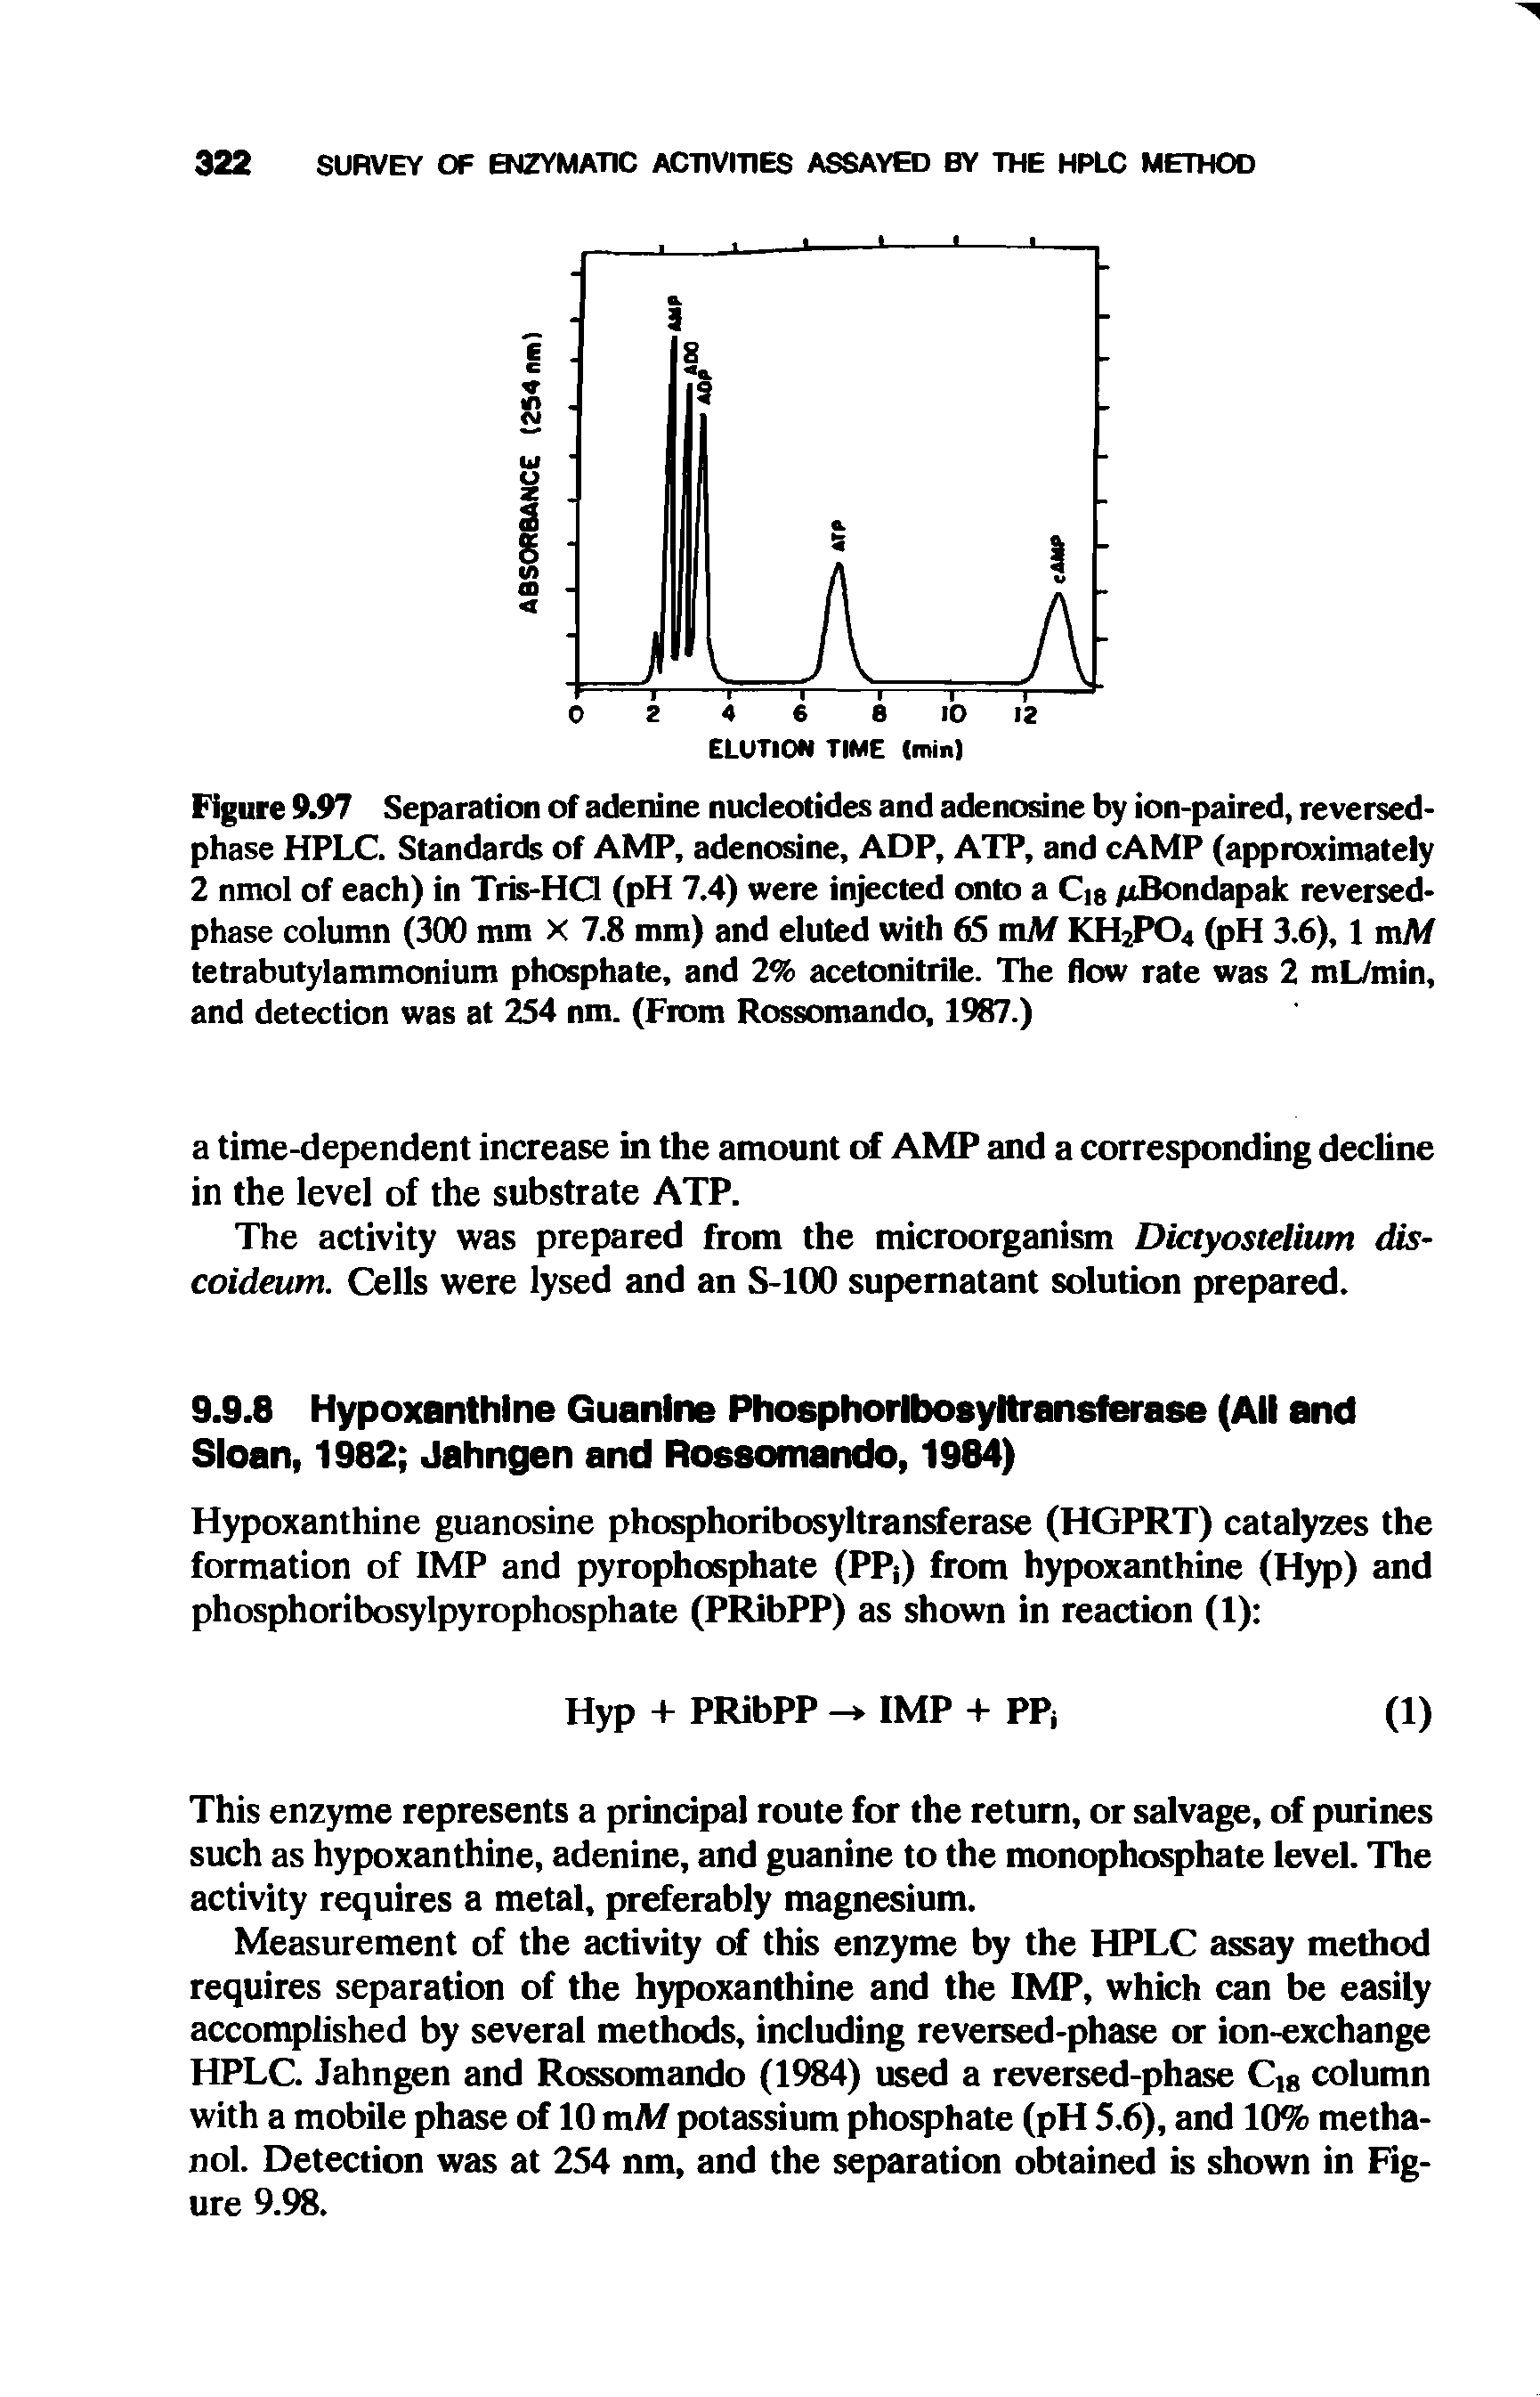 Figure 9.97 Separation of adenine nucleotides and adenosine by ion-paired, reversed-phase HPLC. Standards of AMP, adenosine, ADP, ATP, and cAMP (approximately 2 nmol of each) in Tris-HCl (pH 7.4) were injected onto a Cis /xBondapak reversed-phase column (300 mm X 7.8 mm) and eluted with 65 mM KH2P04 (pH 3.6), 1 vaM tetrabutylammonium phosphate, and 2% acetonitrile. The flow rate was 2 mL/min, and detection was at 254 nm. (From Rossomando, 1987.)...